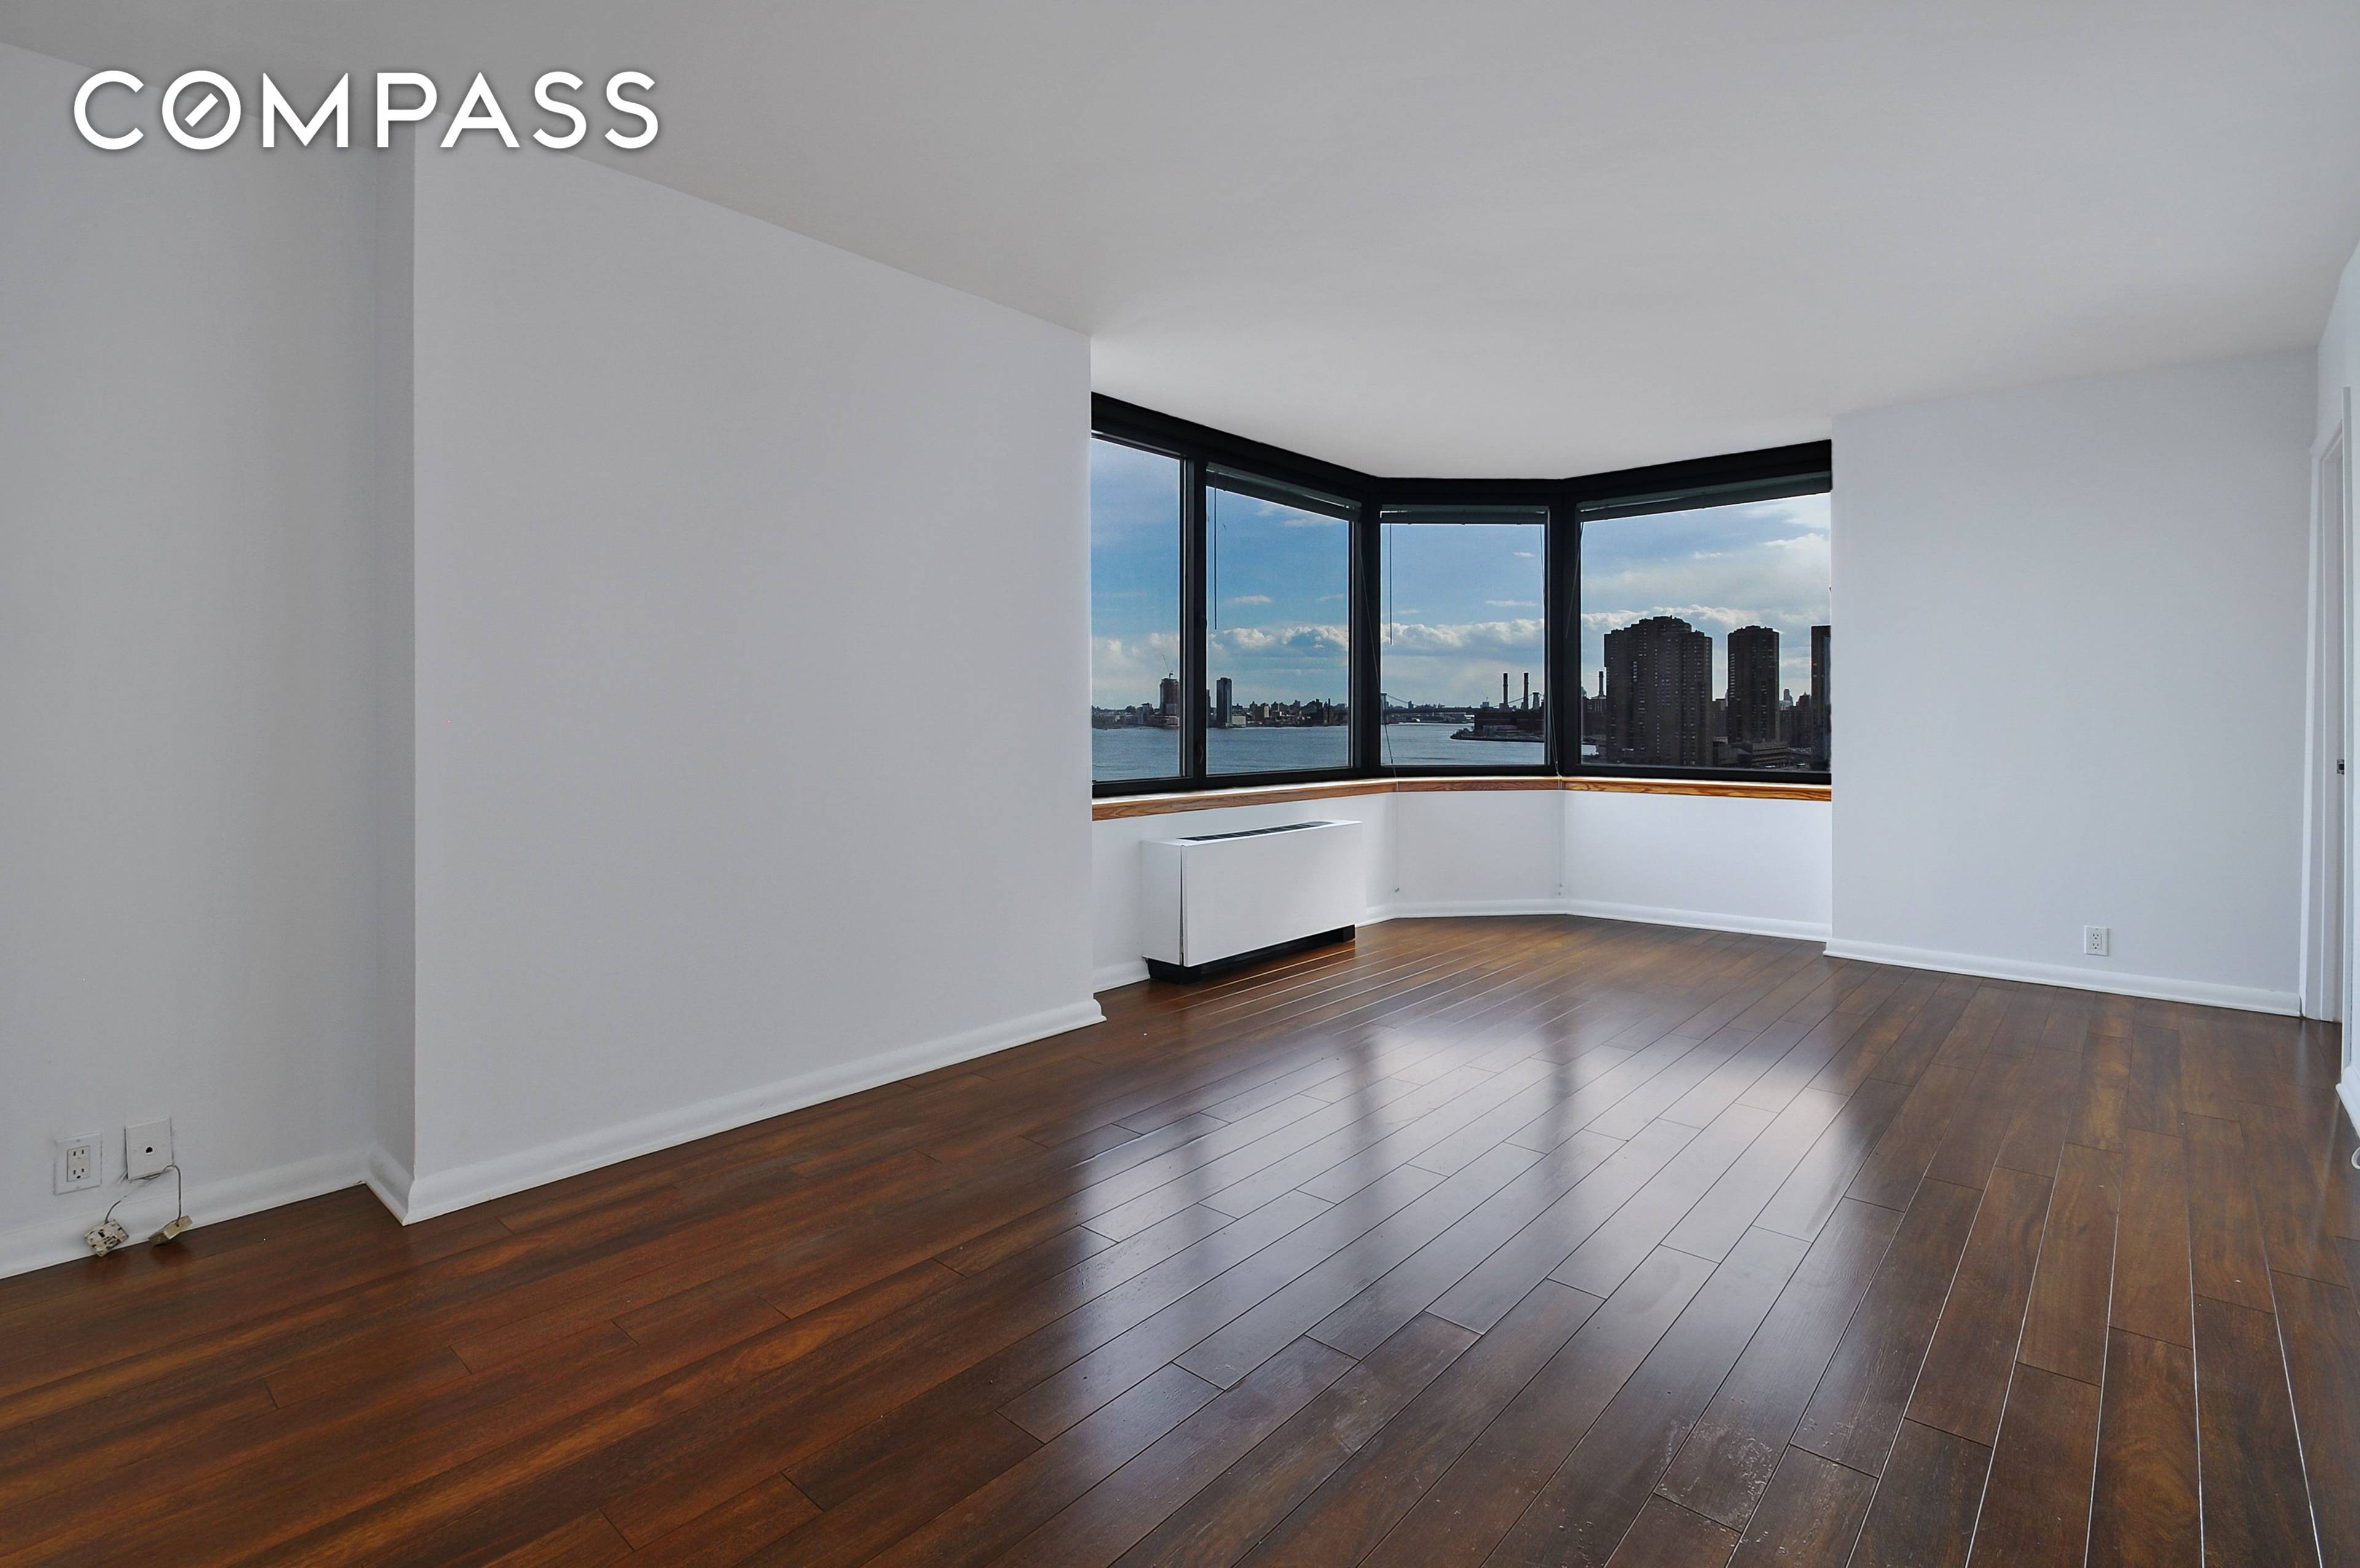 Welcome to 415 E 37th Street, 16F a two bed, two bath home with incredible, unobstructed open views of the East River.